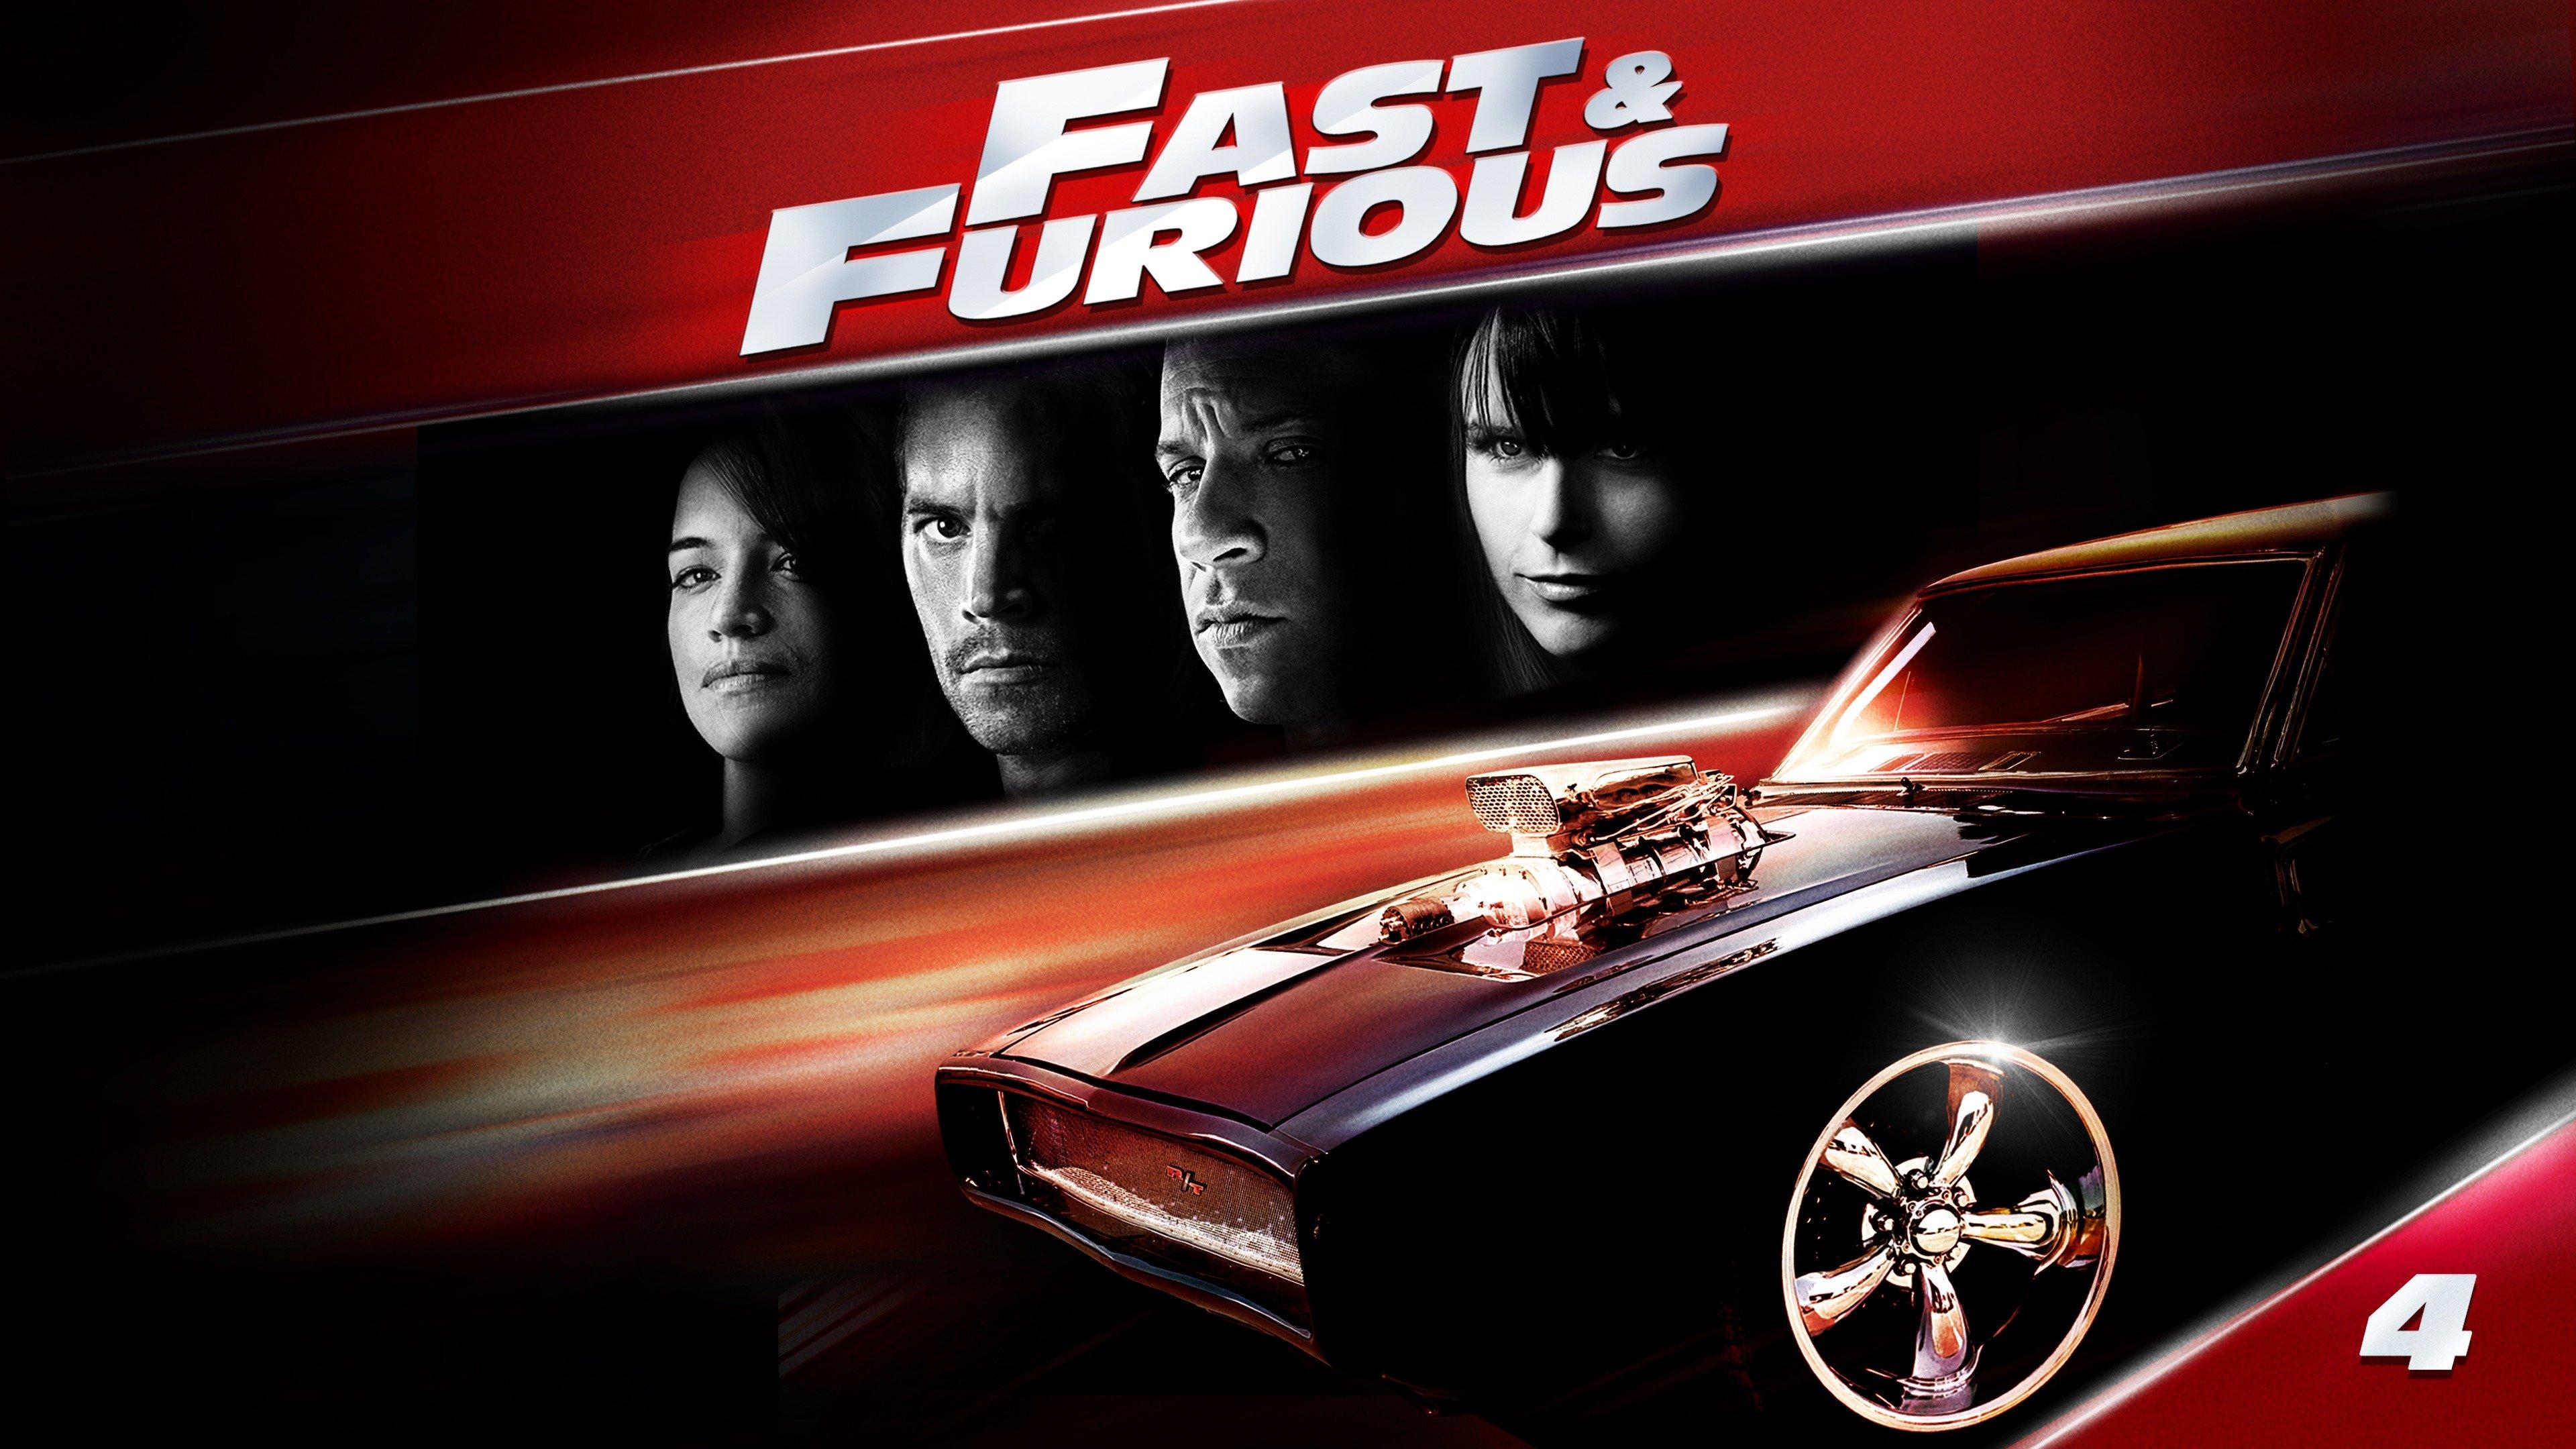 Watch Fast & Furious Streaming Online on Philo (Free Trial)